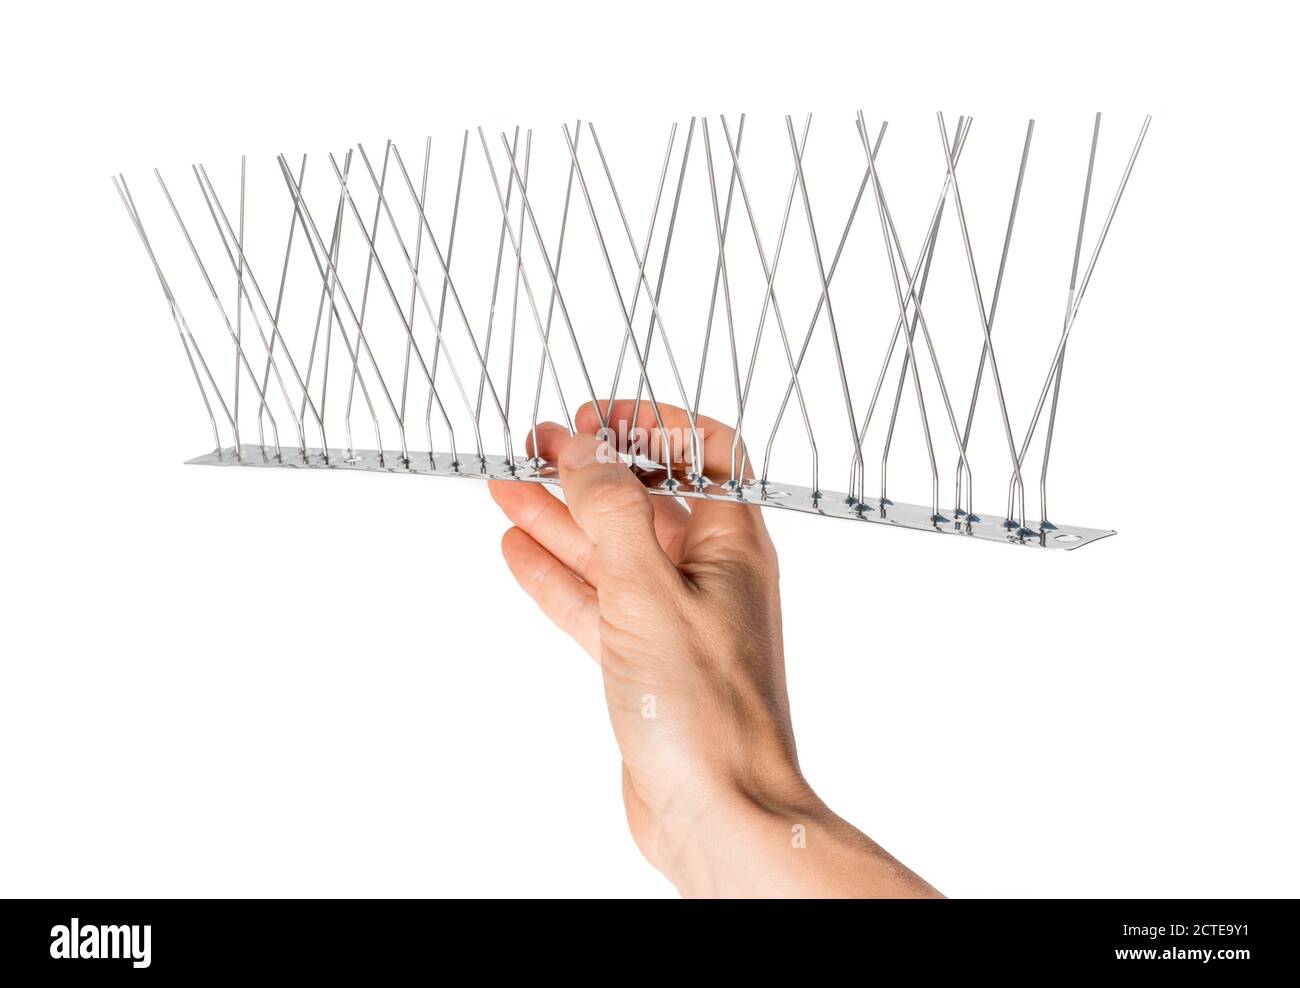 Hand holding single strip of bird spikes. The stainless bird spikes or pins prevent pigeons, sparrows, seagulls, swallows etc. from landing, roosting Stock Photo